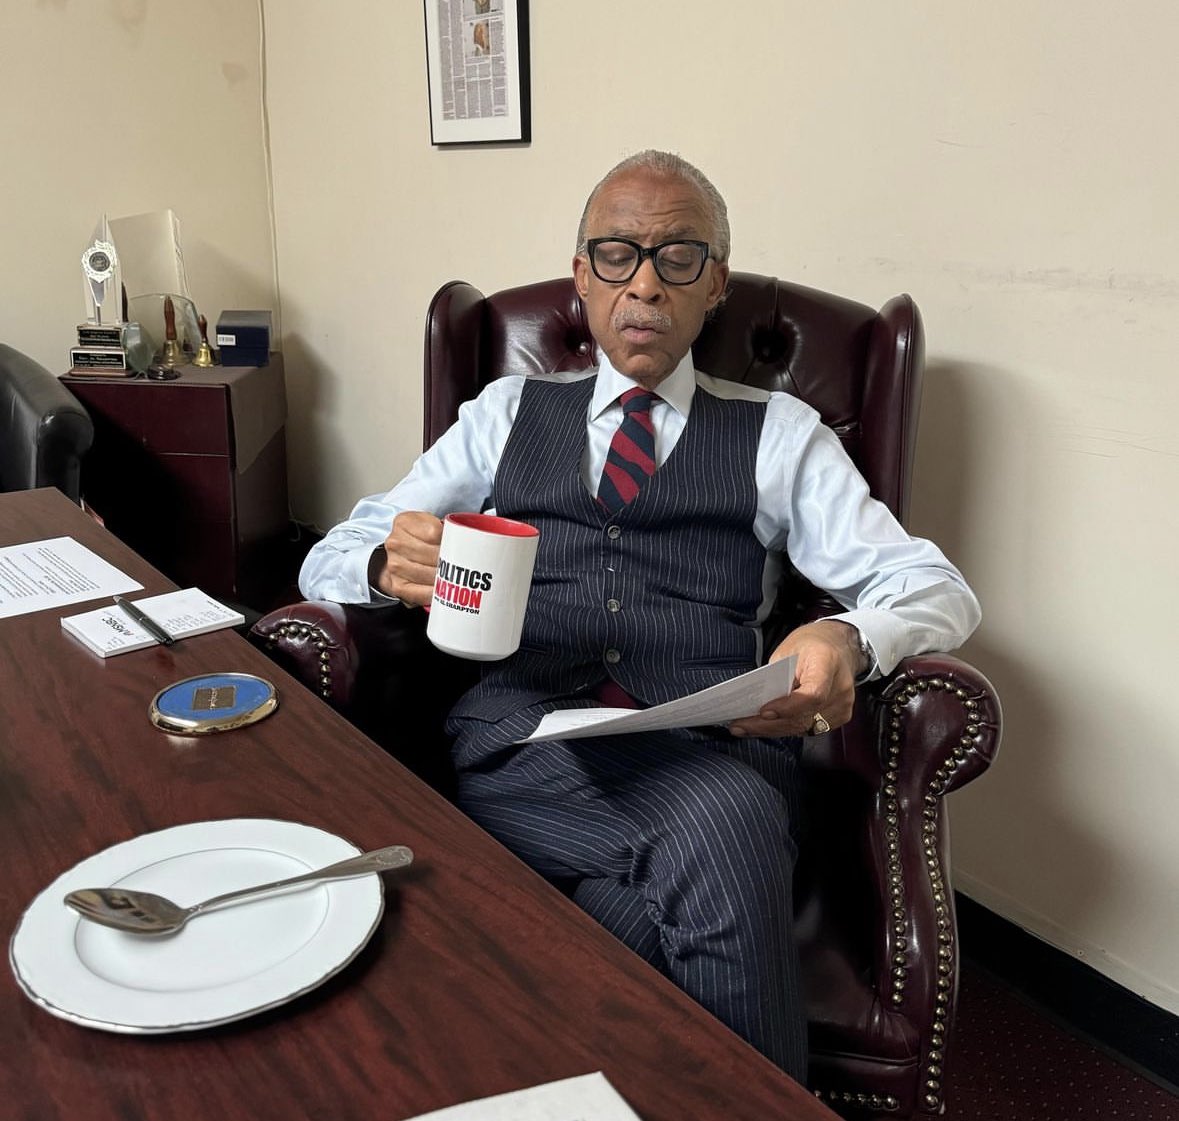 At NAN’s House of Justice getting ready to keynote the Saturday Action Rally. Tune in live at 1190 WLIB AM from 9-11 am/et or IMPACT TV from 10-11 am/et.